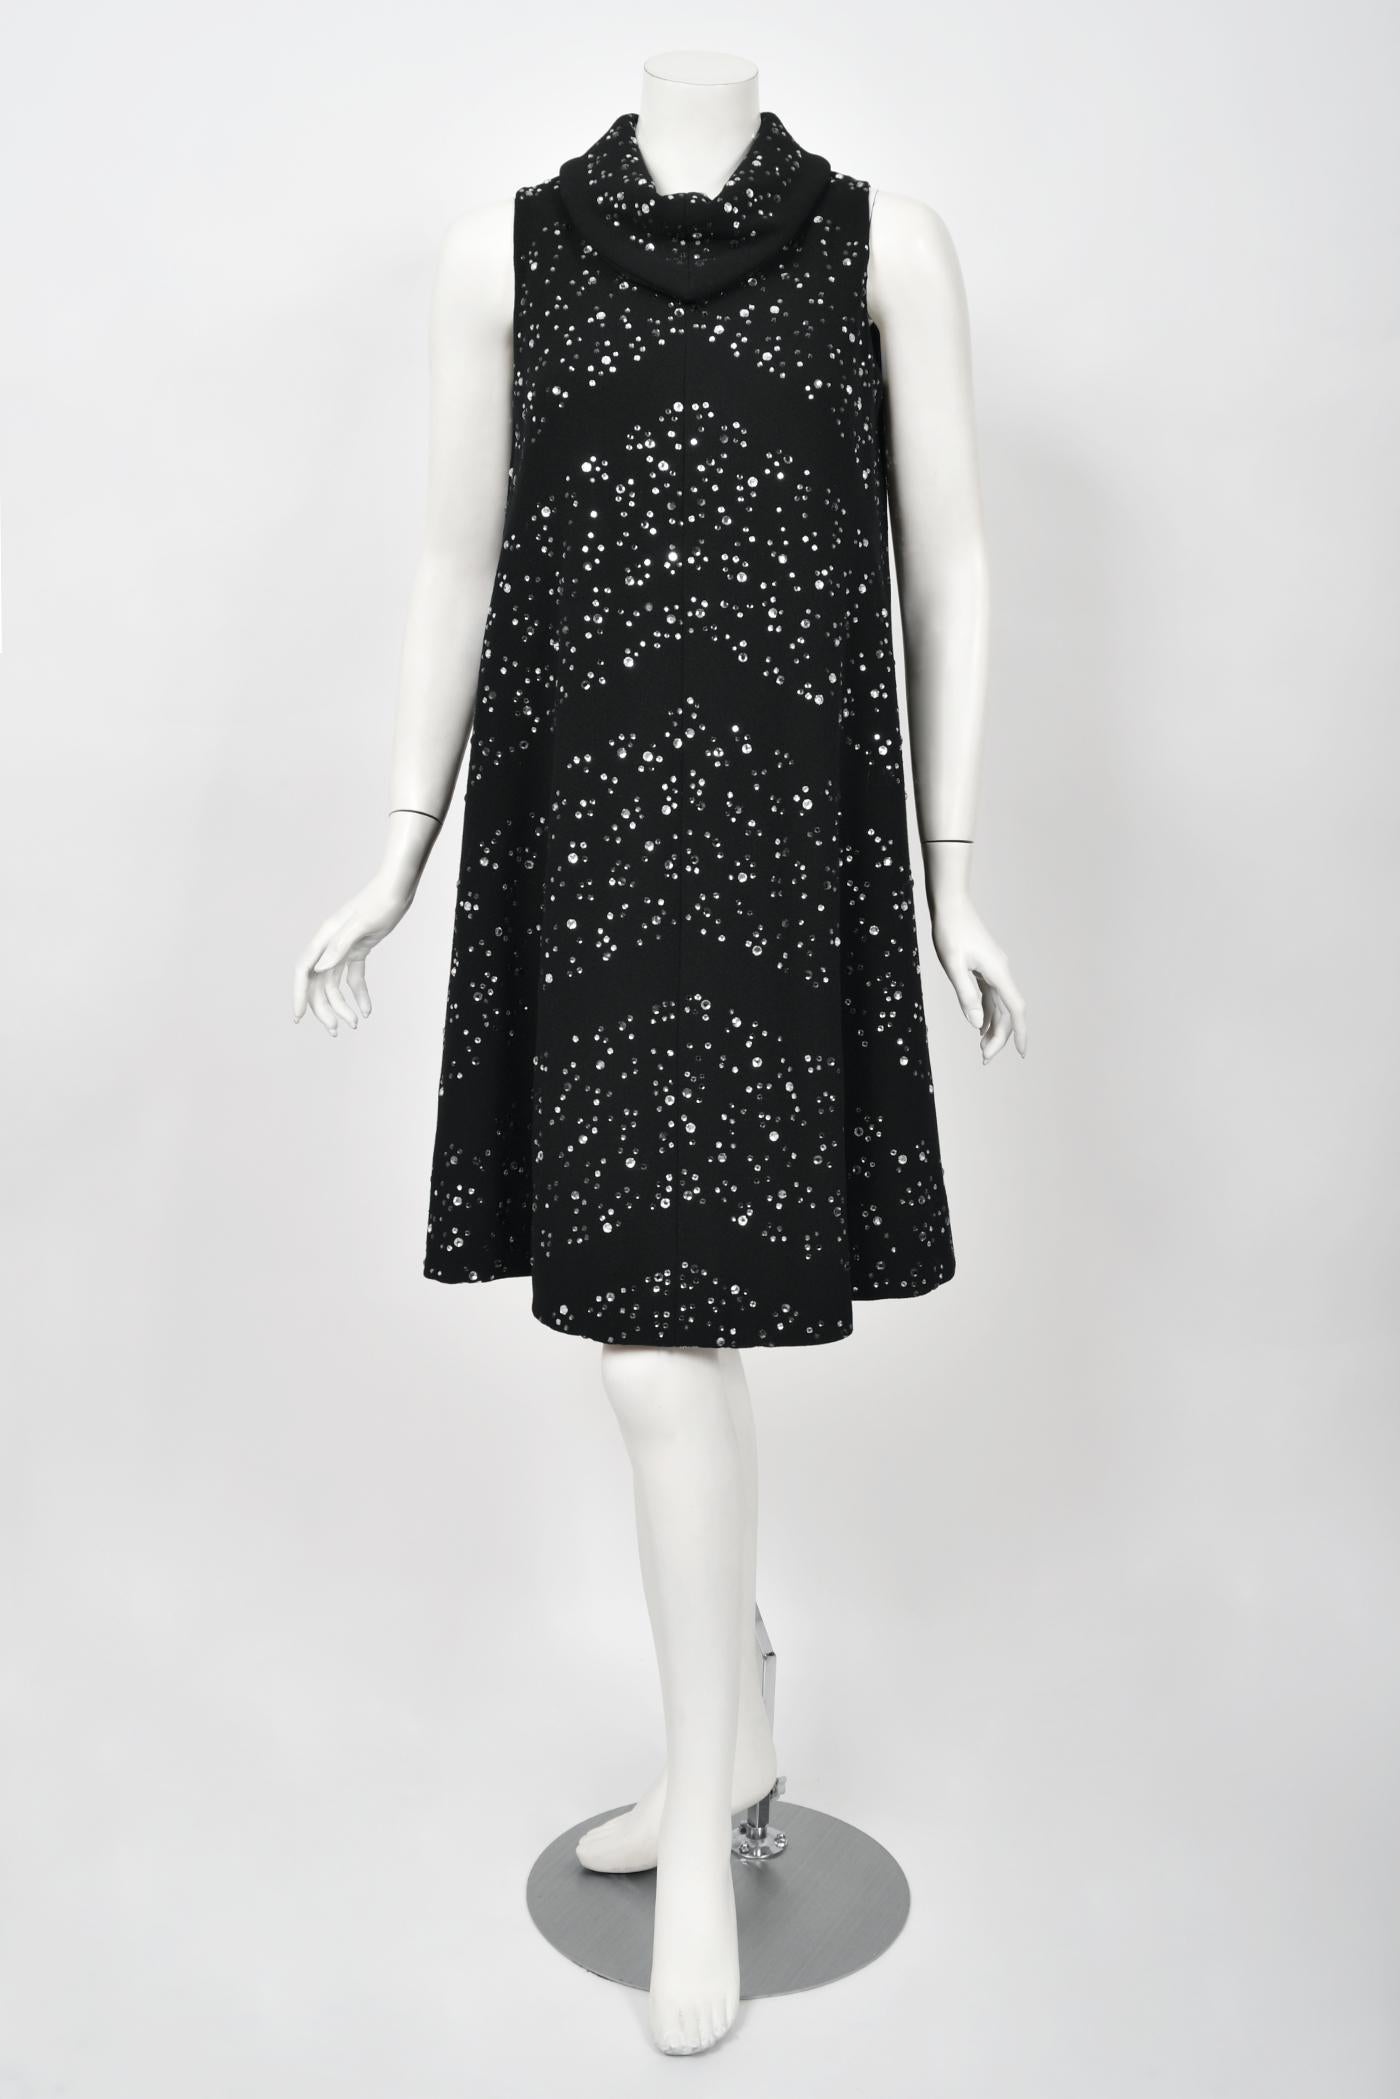 An exceptionally chic and totally timeless Pauline Trigère cocktail dress dating back to the mid 1960's. During this time period, Pauline Trigère's name was part of the glamorous excess in Hollywood fashion. Her exquisite tailoring and feminine